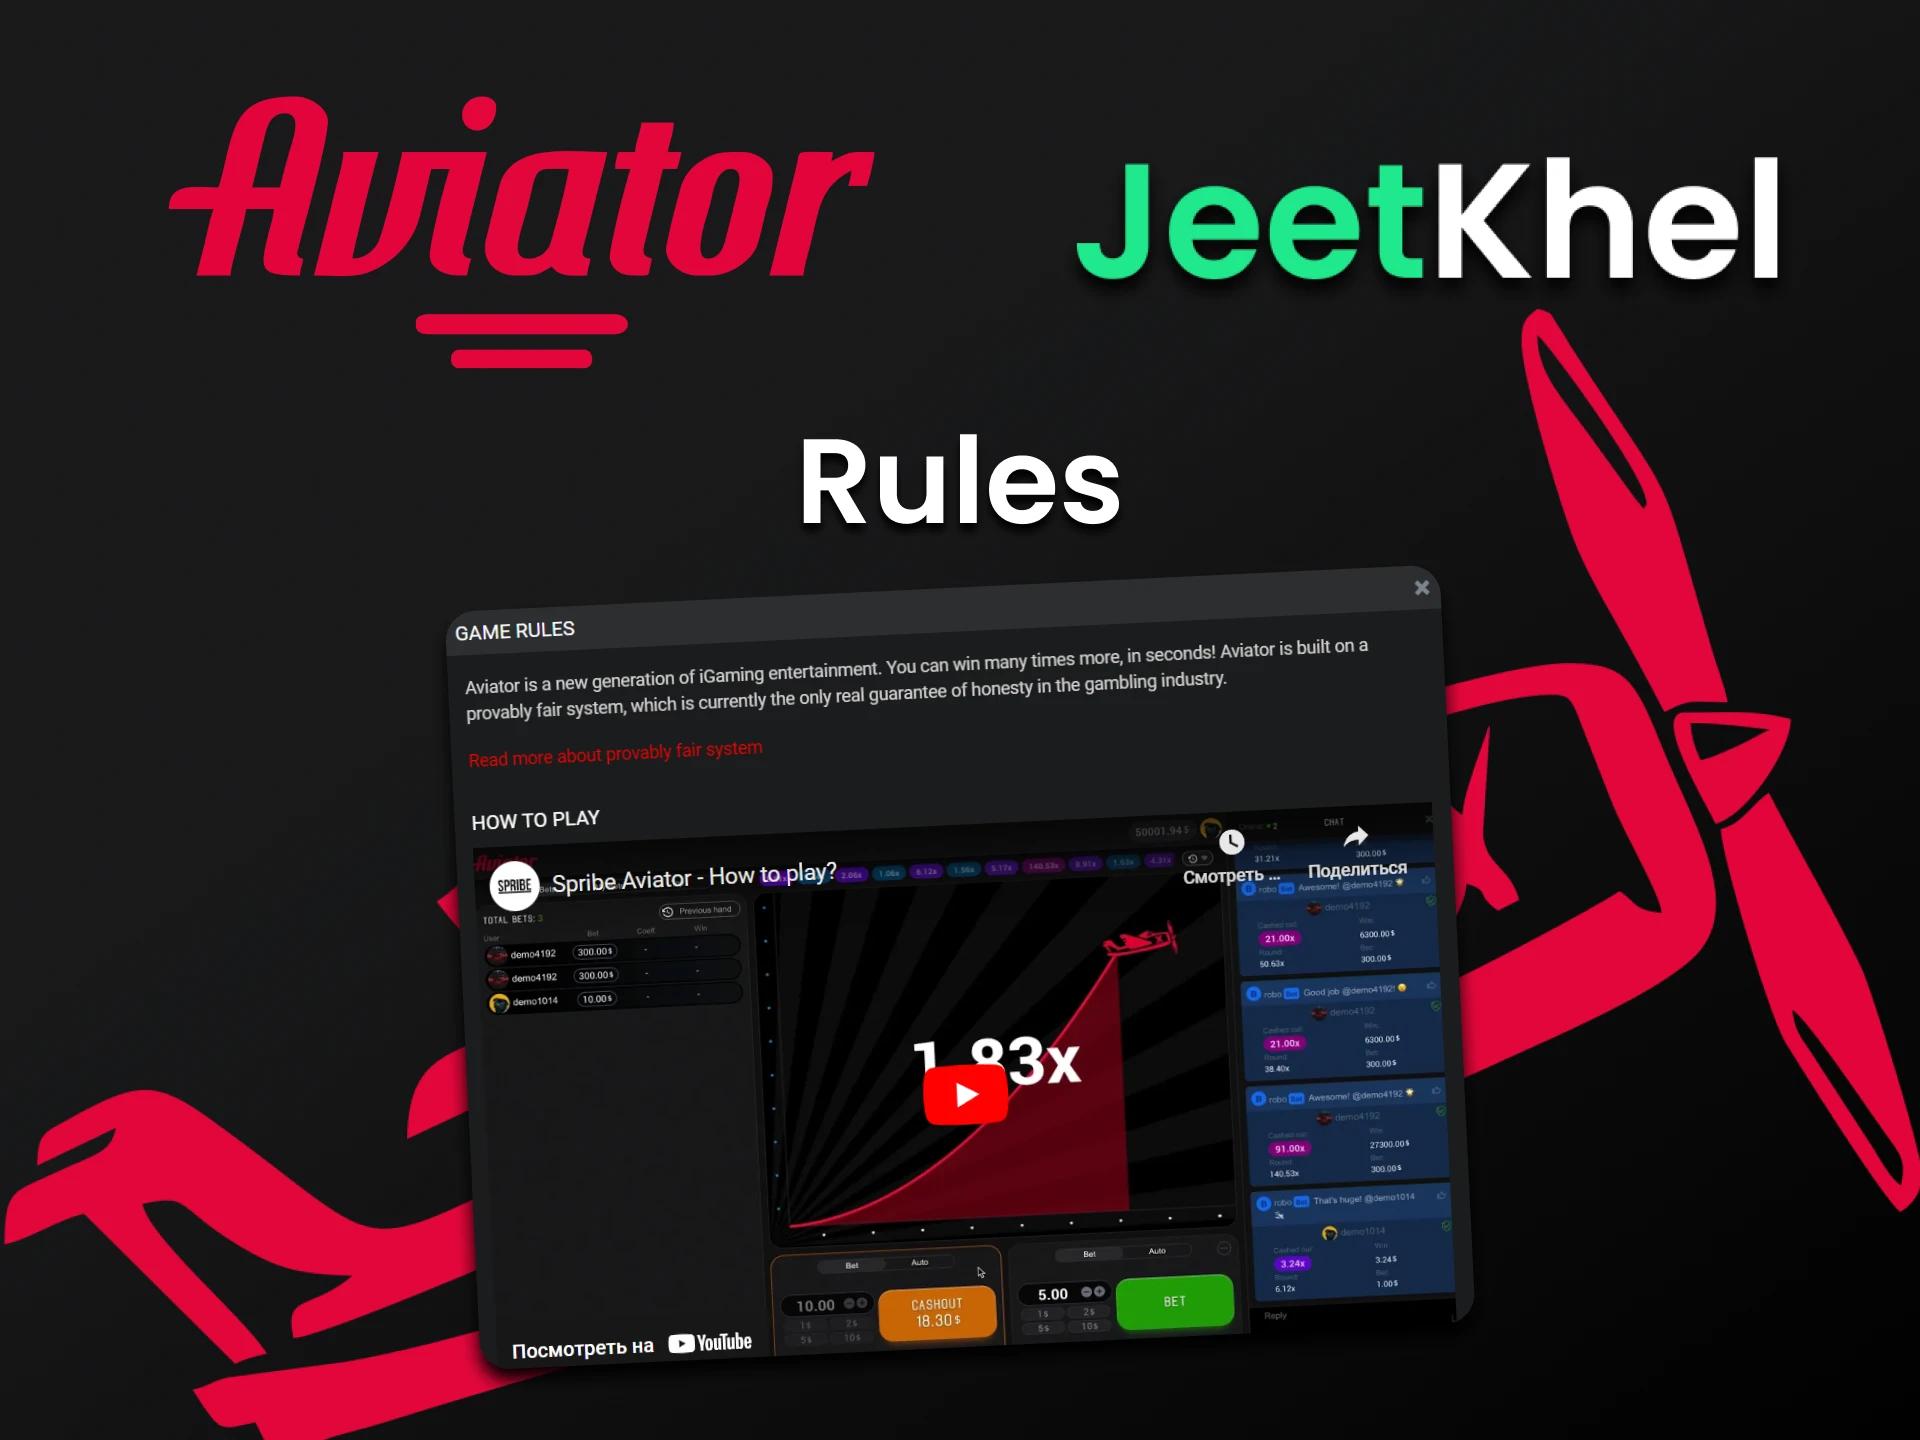 Check out the rules of the Aviator game on JeetKhel.